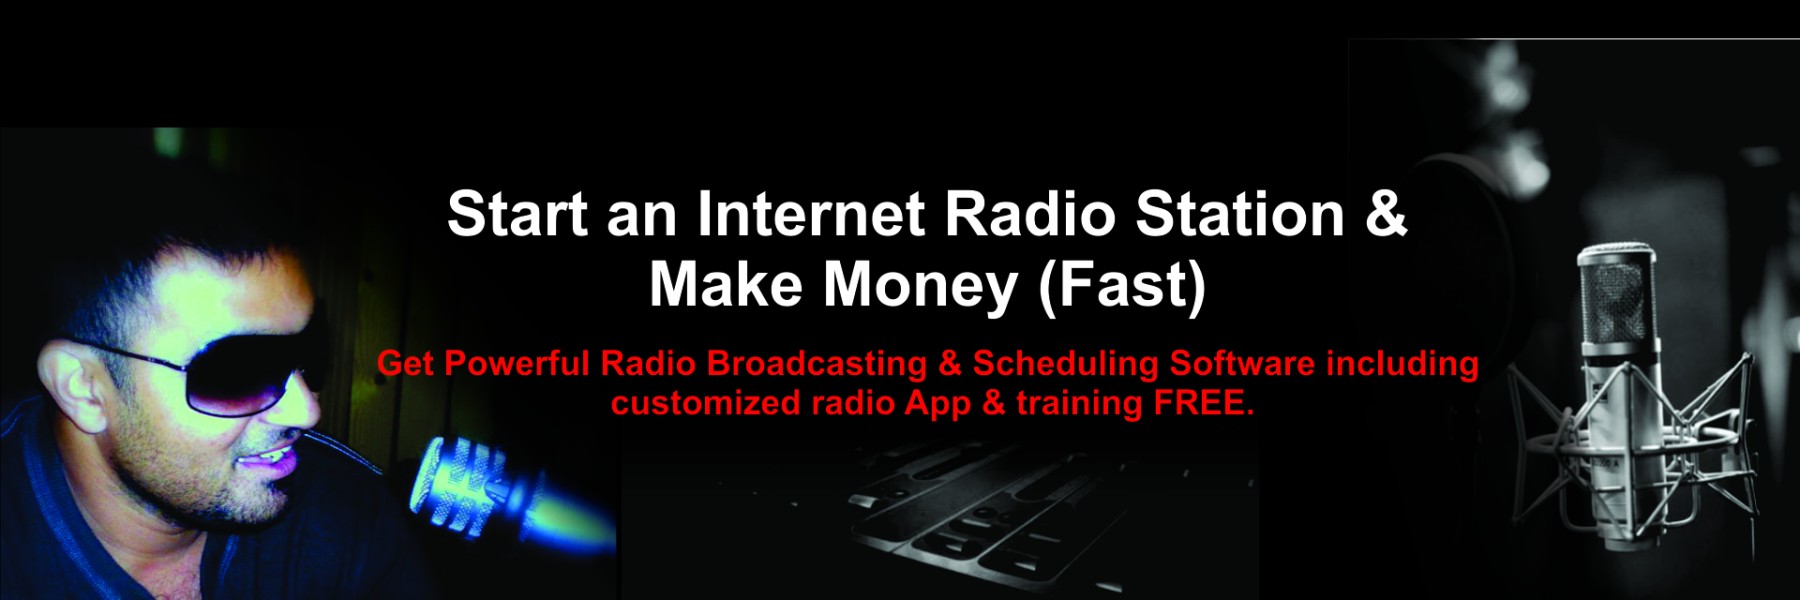 Zapatos codo Ninguna Learn- How to start internet radio station from Home in 2020 (Free  Step-By-Step Guide) | Riggro Digital